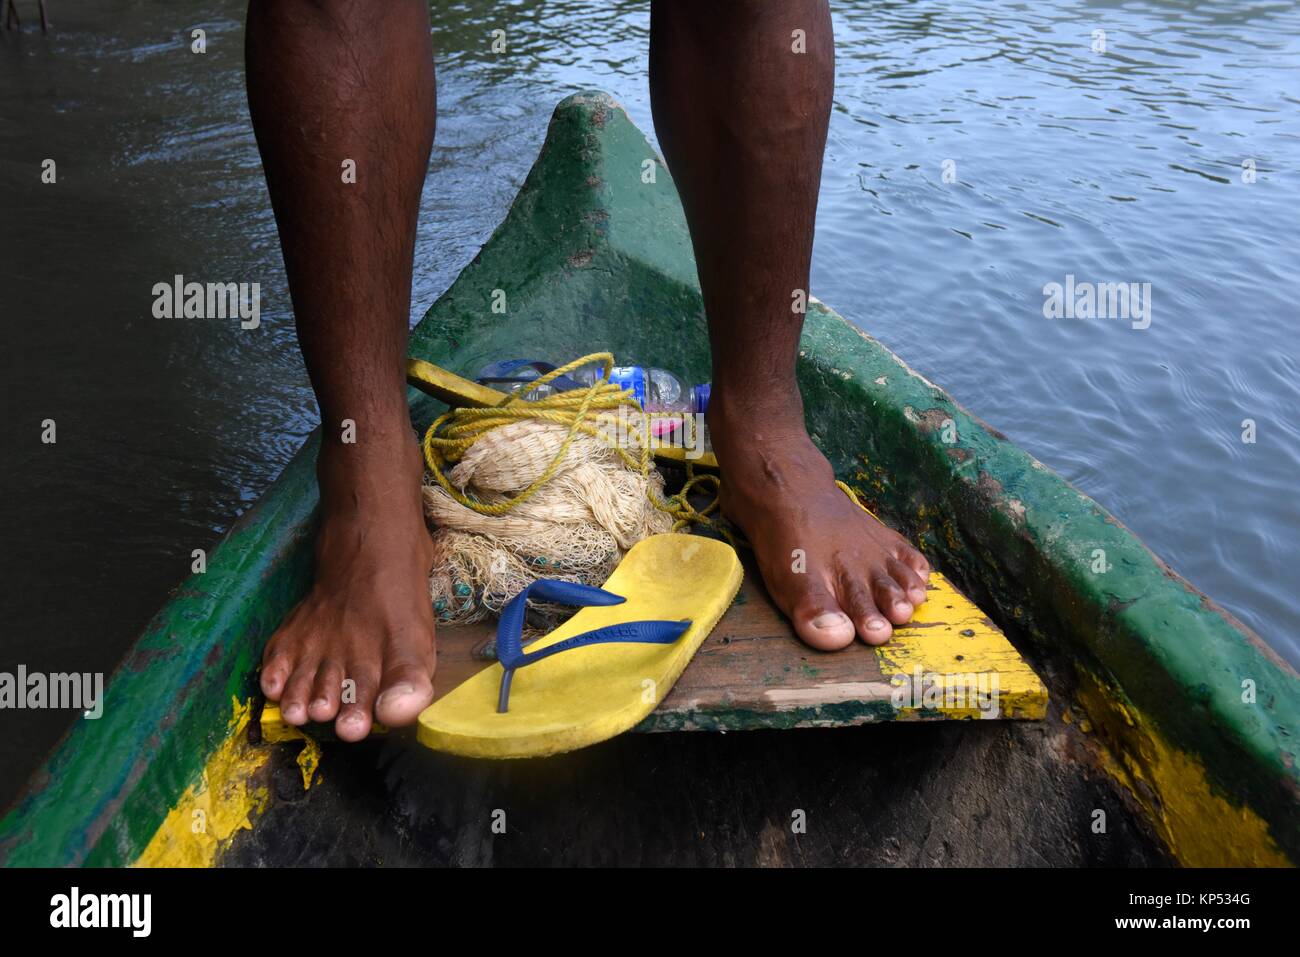 Man´s leg in a canoe, Colombia, South America. Stock Photo